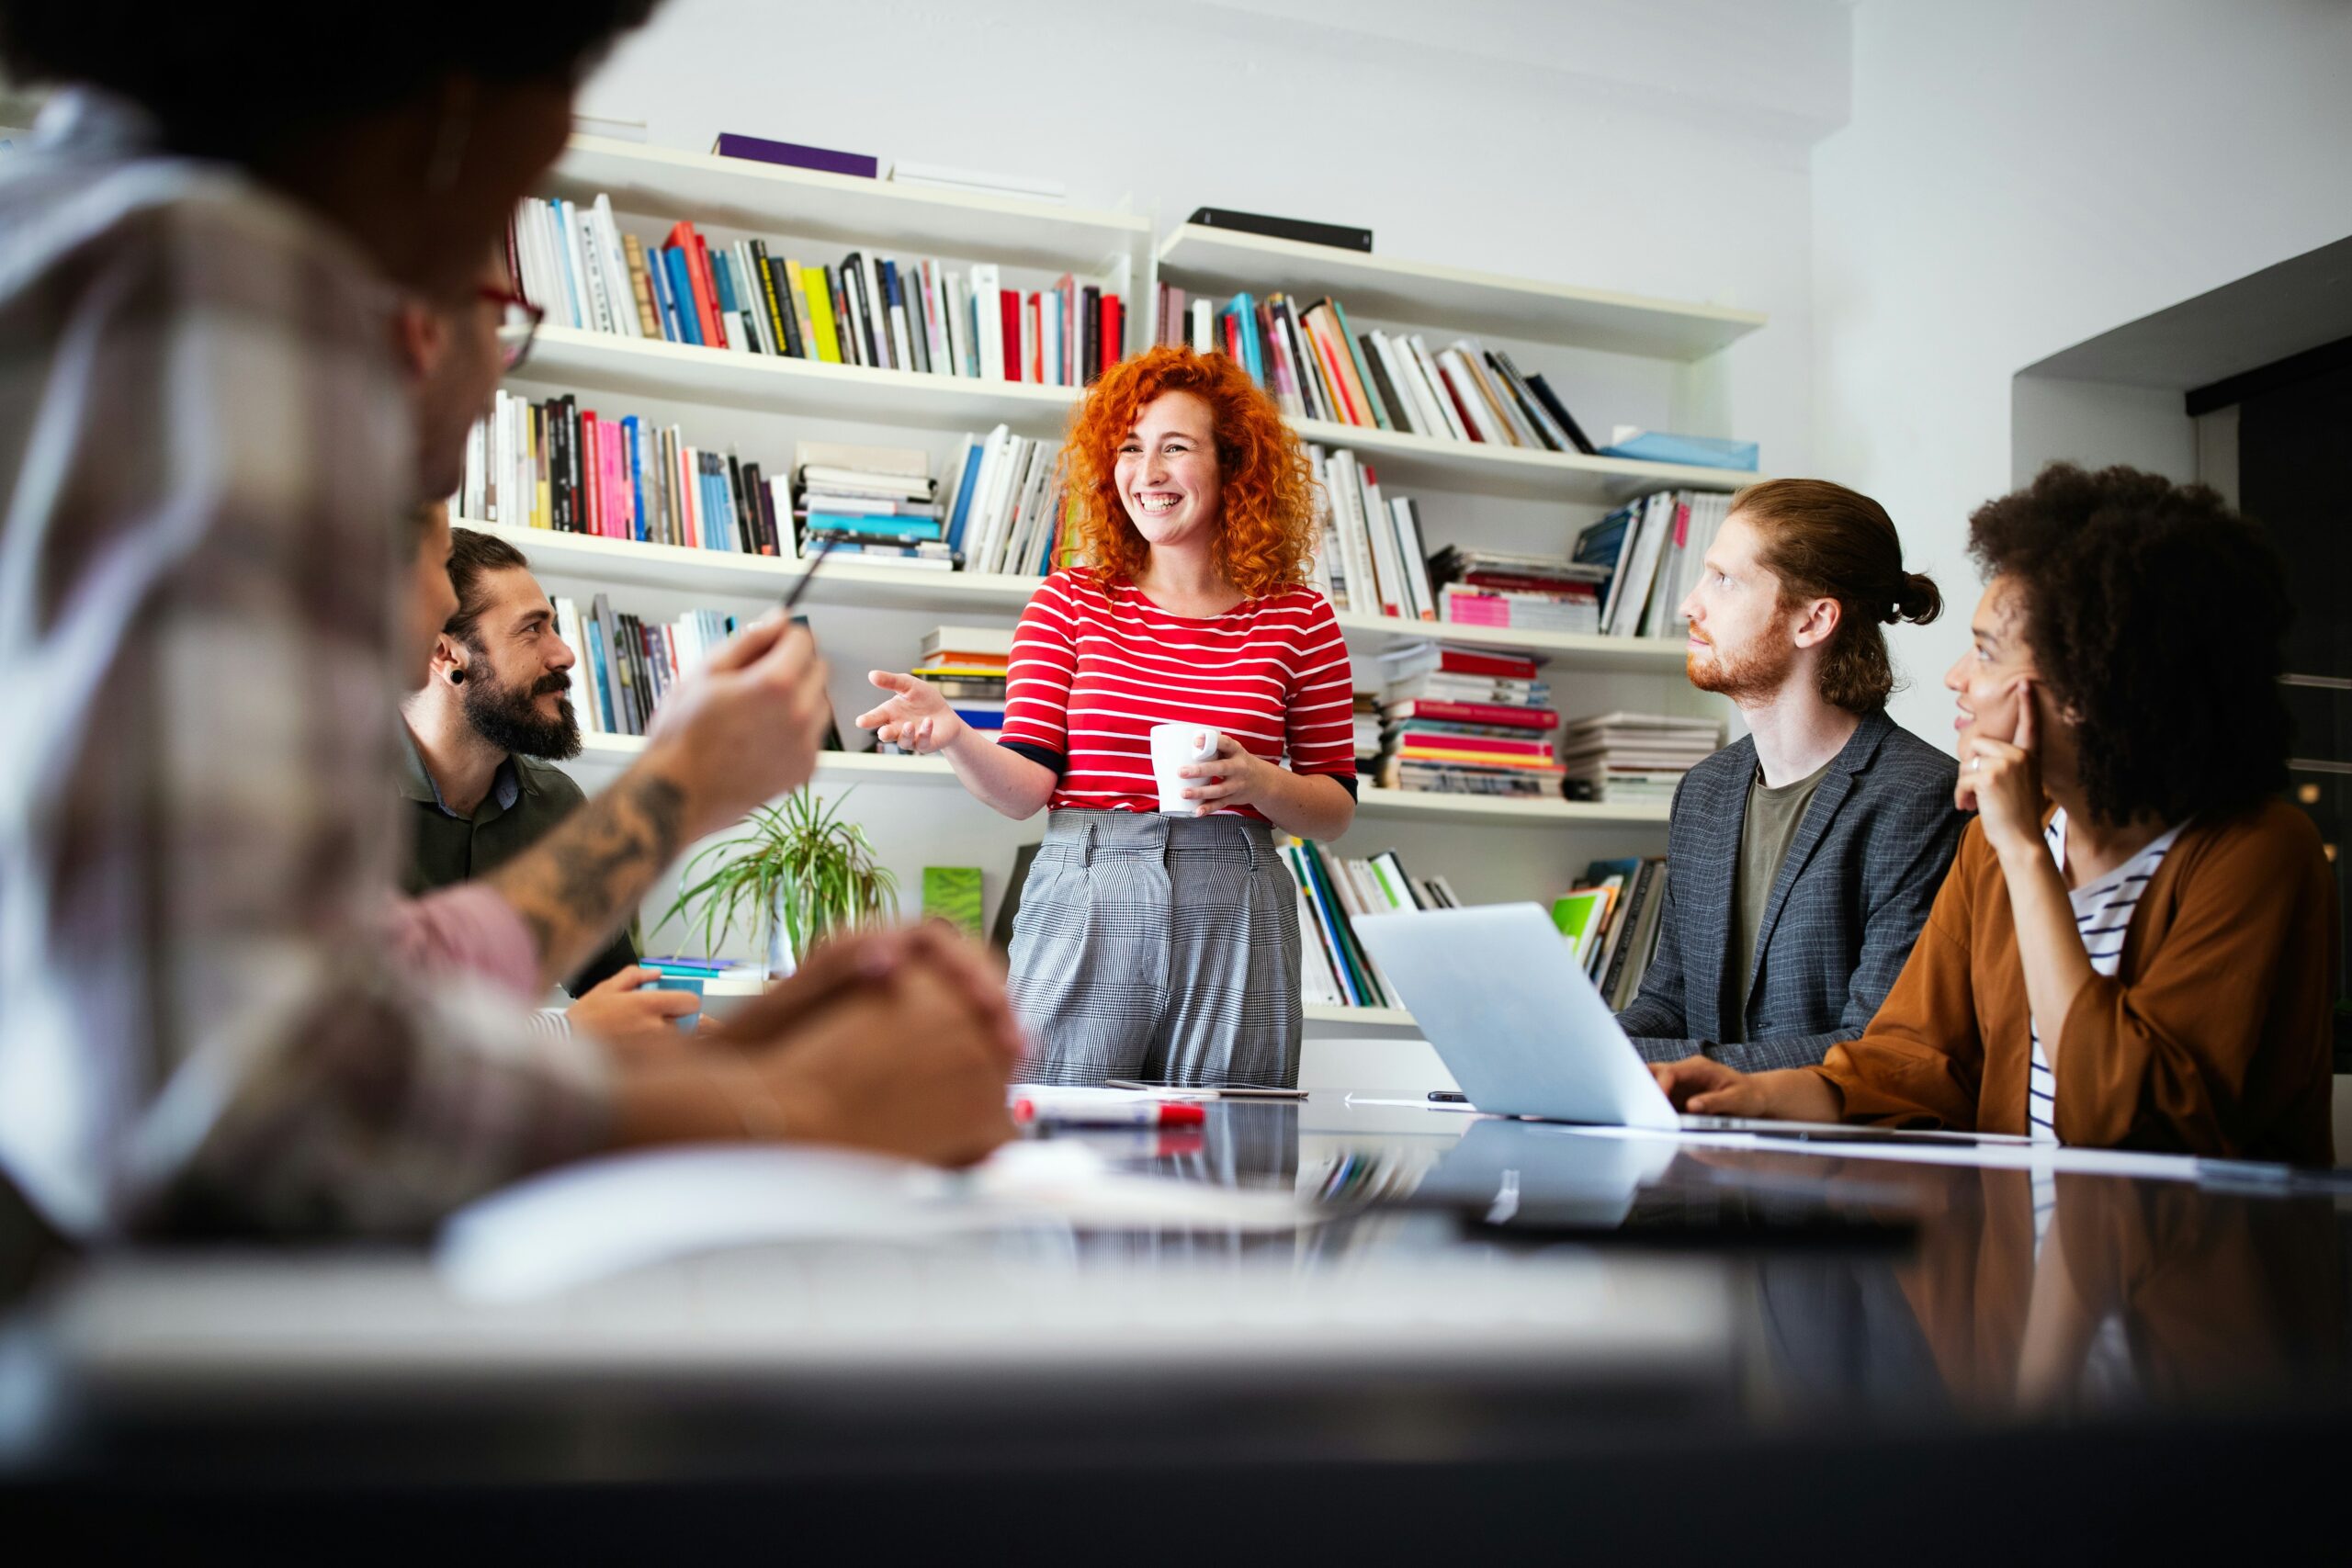 A red-haired woman in a striped shirt presents on what does an IT strategy consultant do at a meeting with four colleagues in a library.